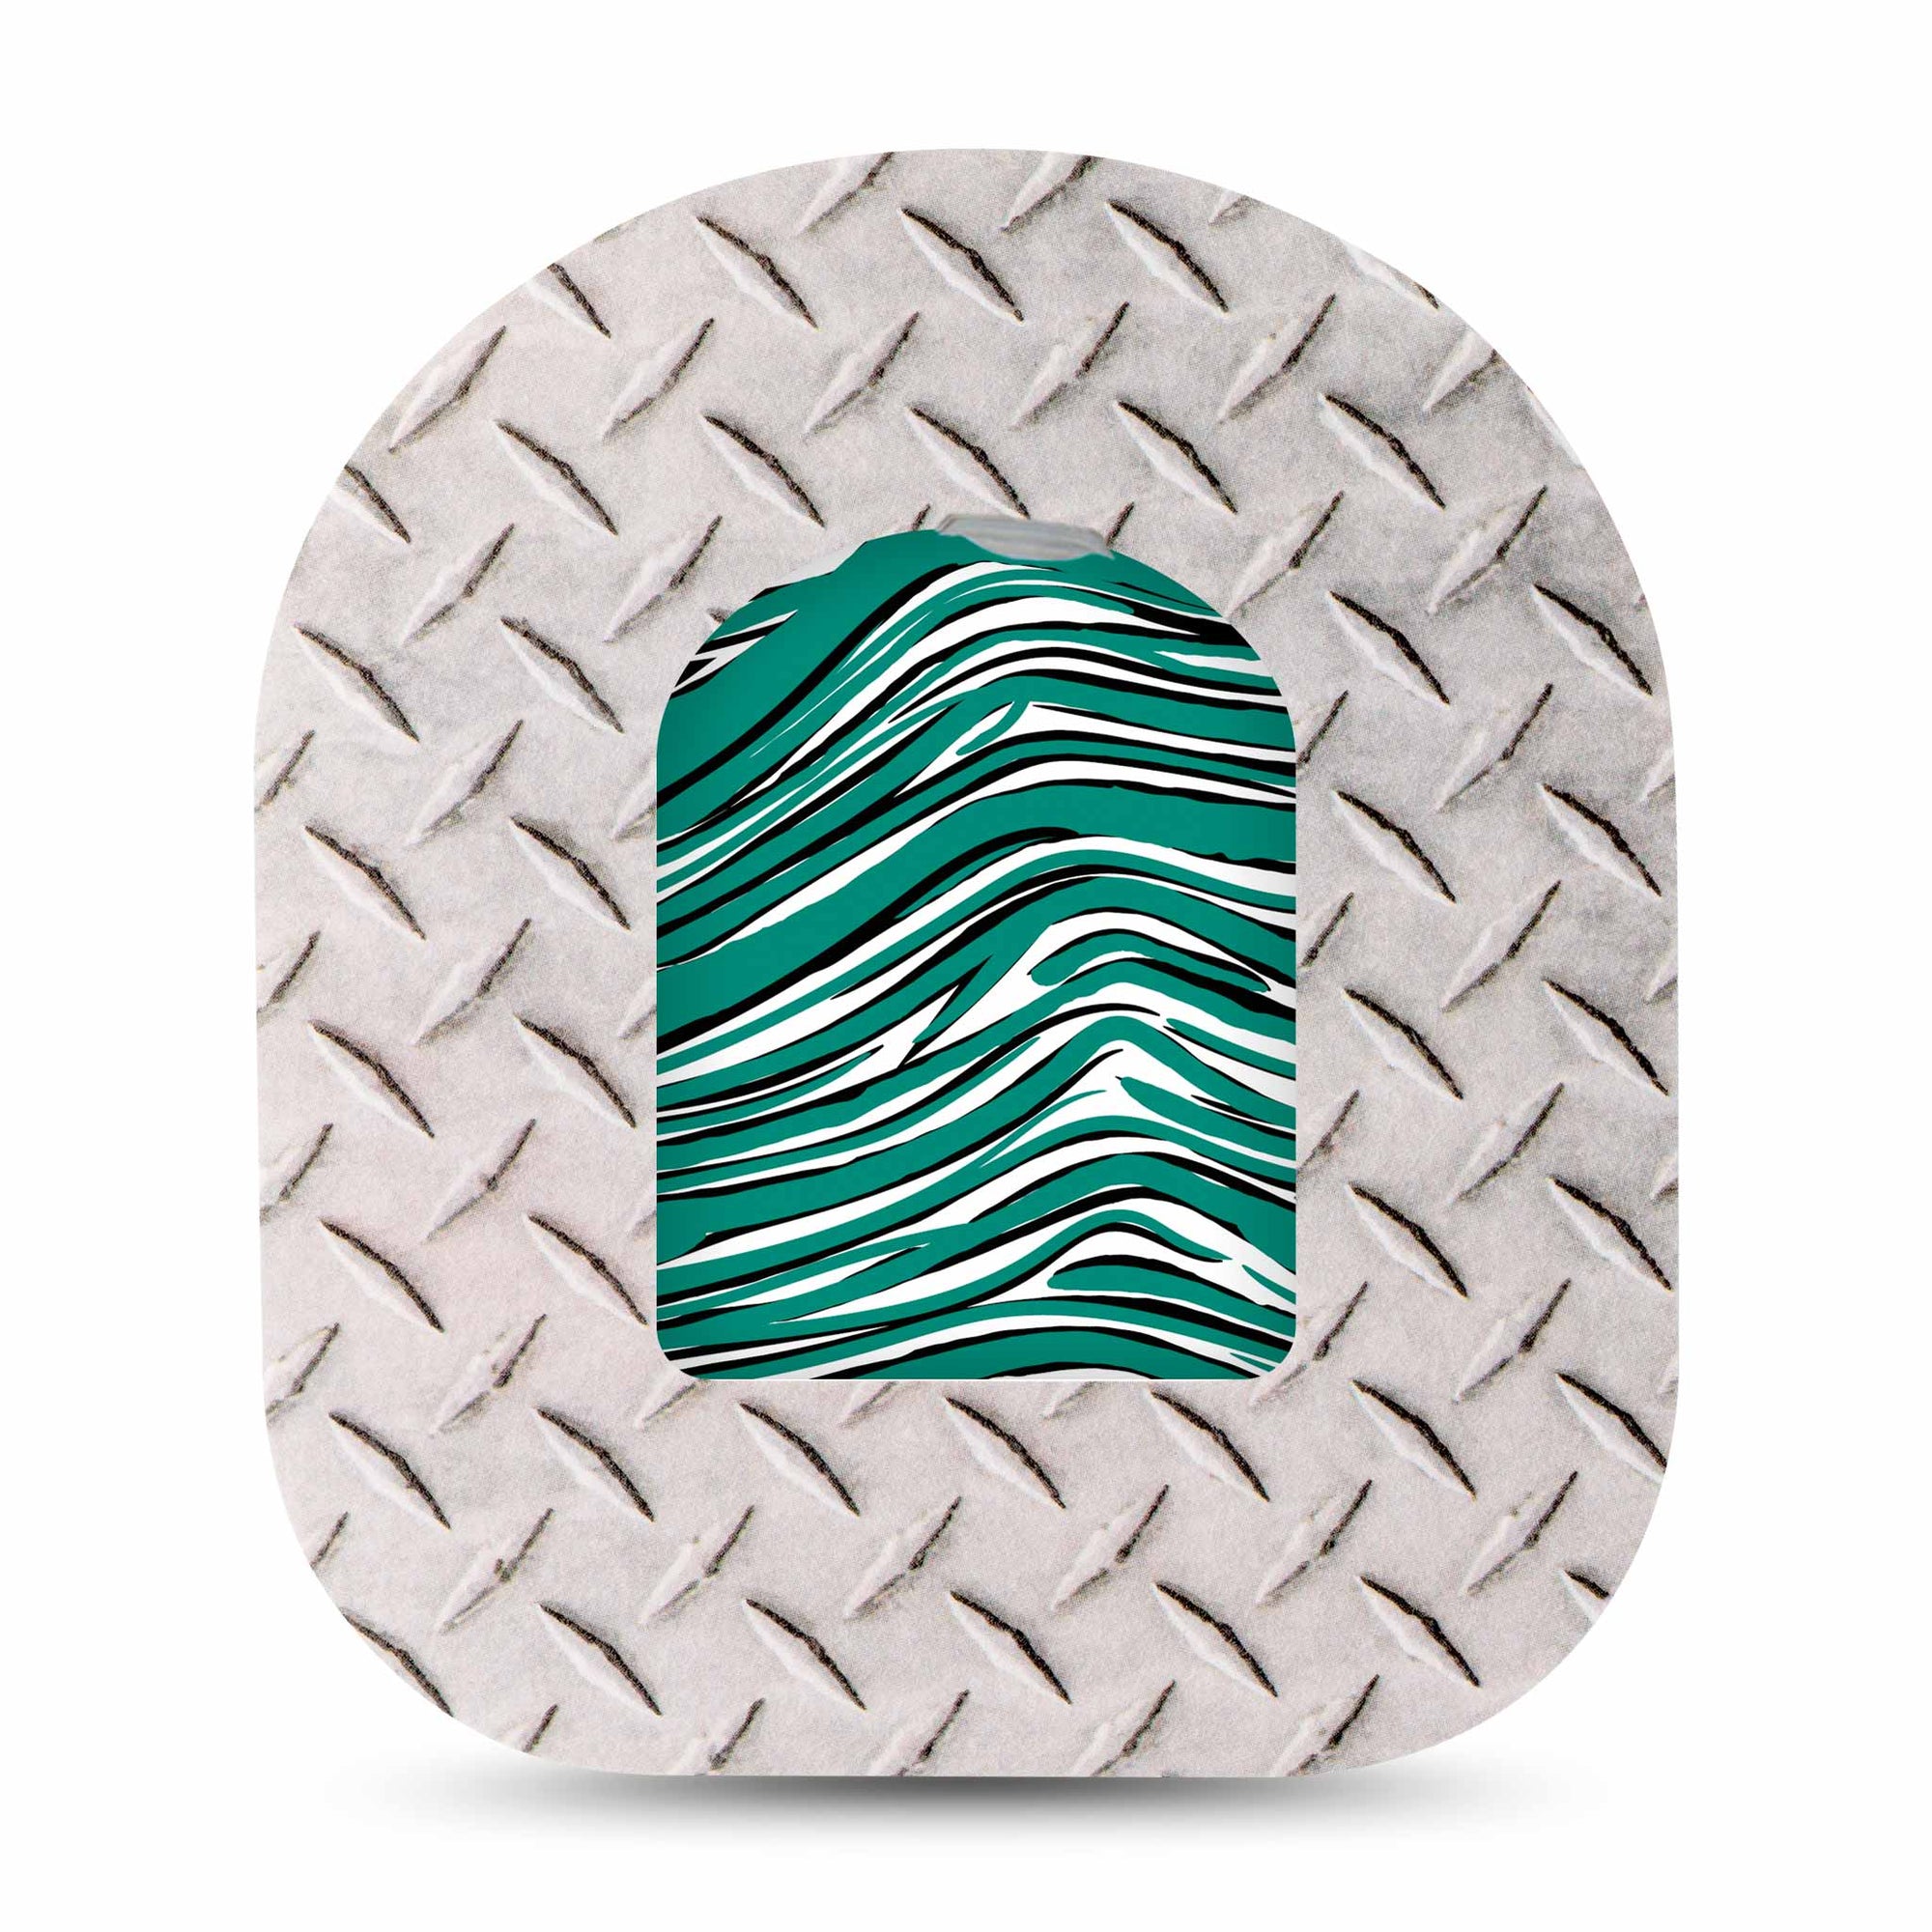 ExpressionMed Green and White Jets Team Spirit Omnipod Sticker and Grid Iron Adhesive